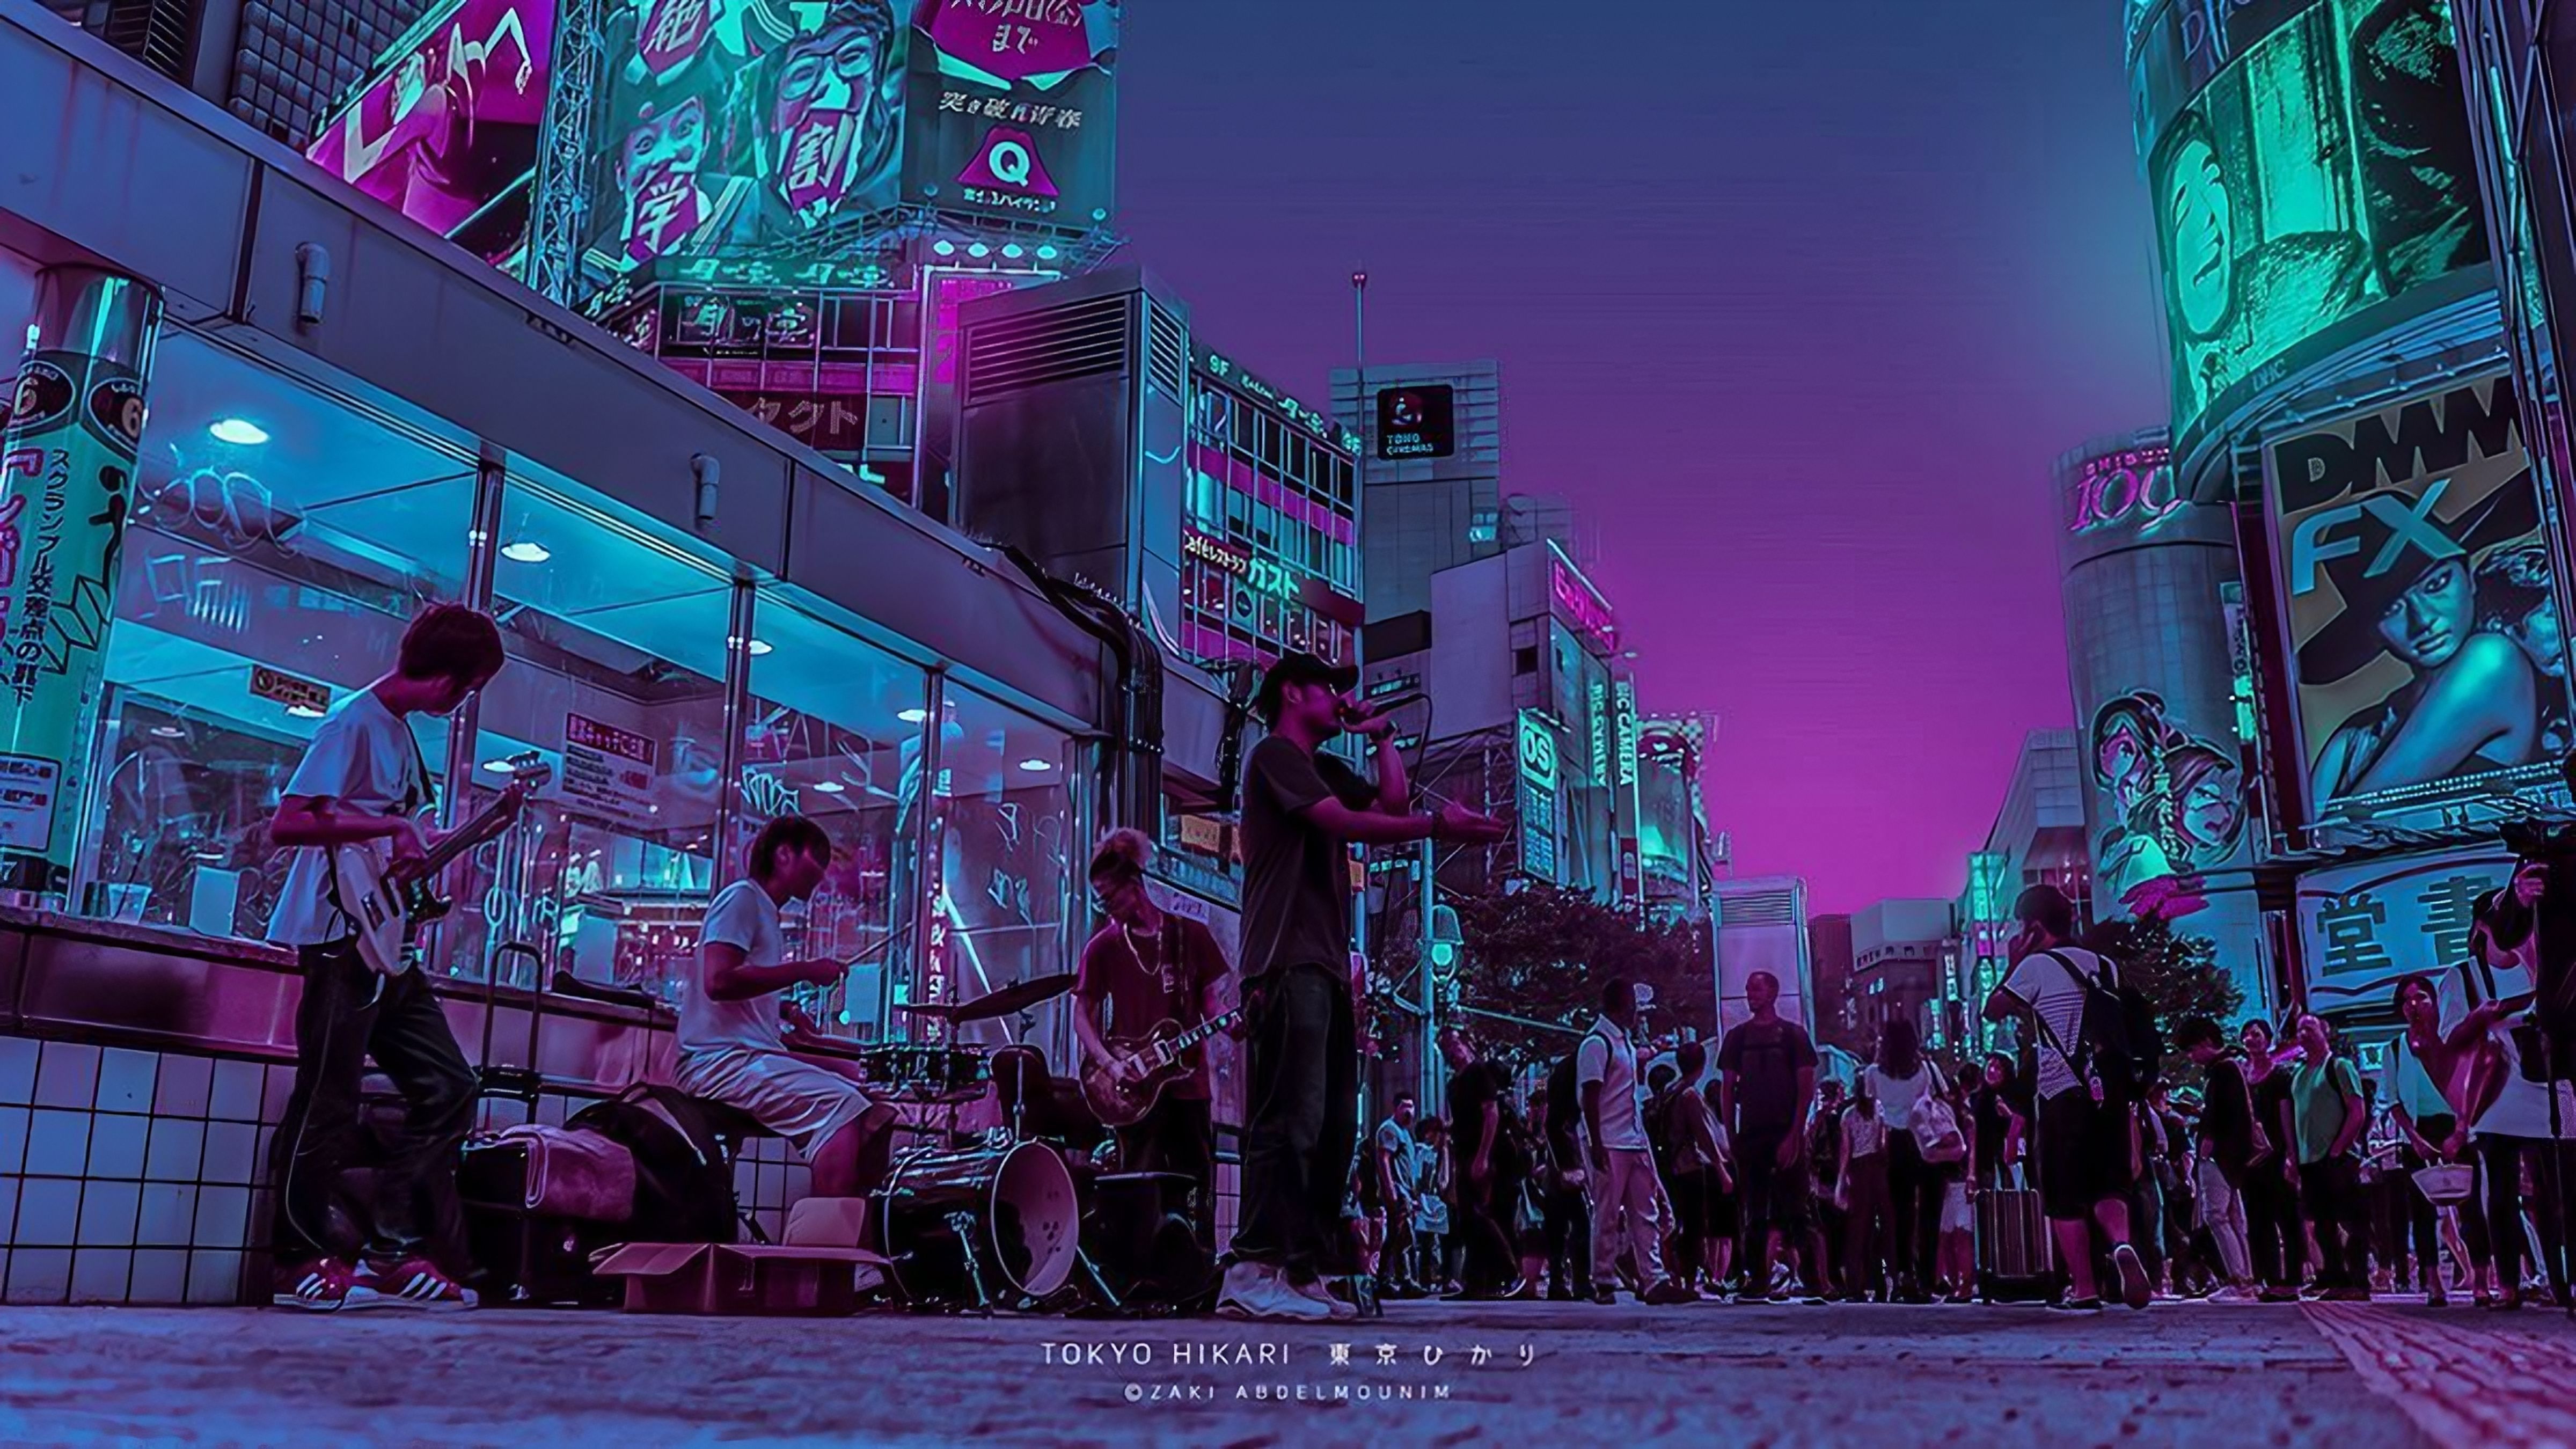 A group of people standing on the sidewalk - Tokyo